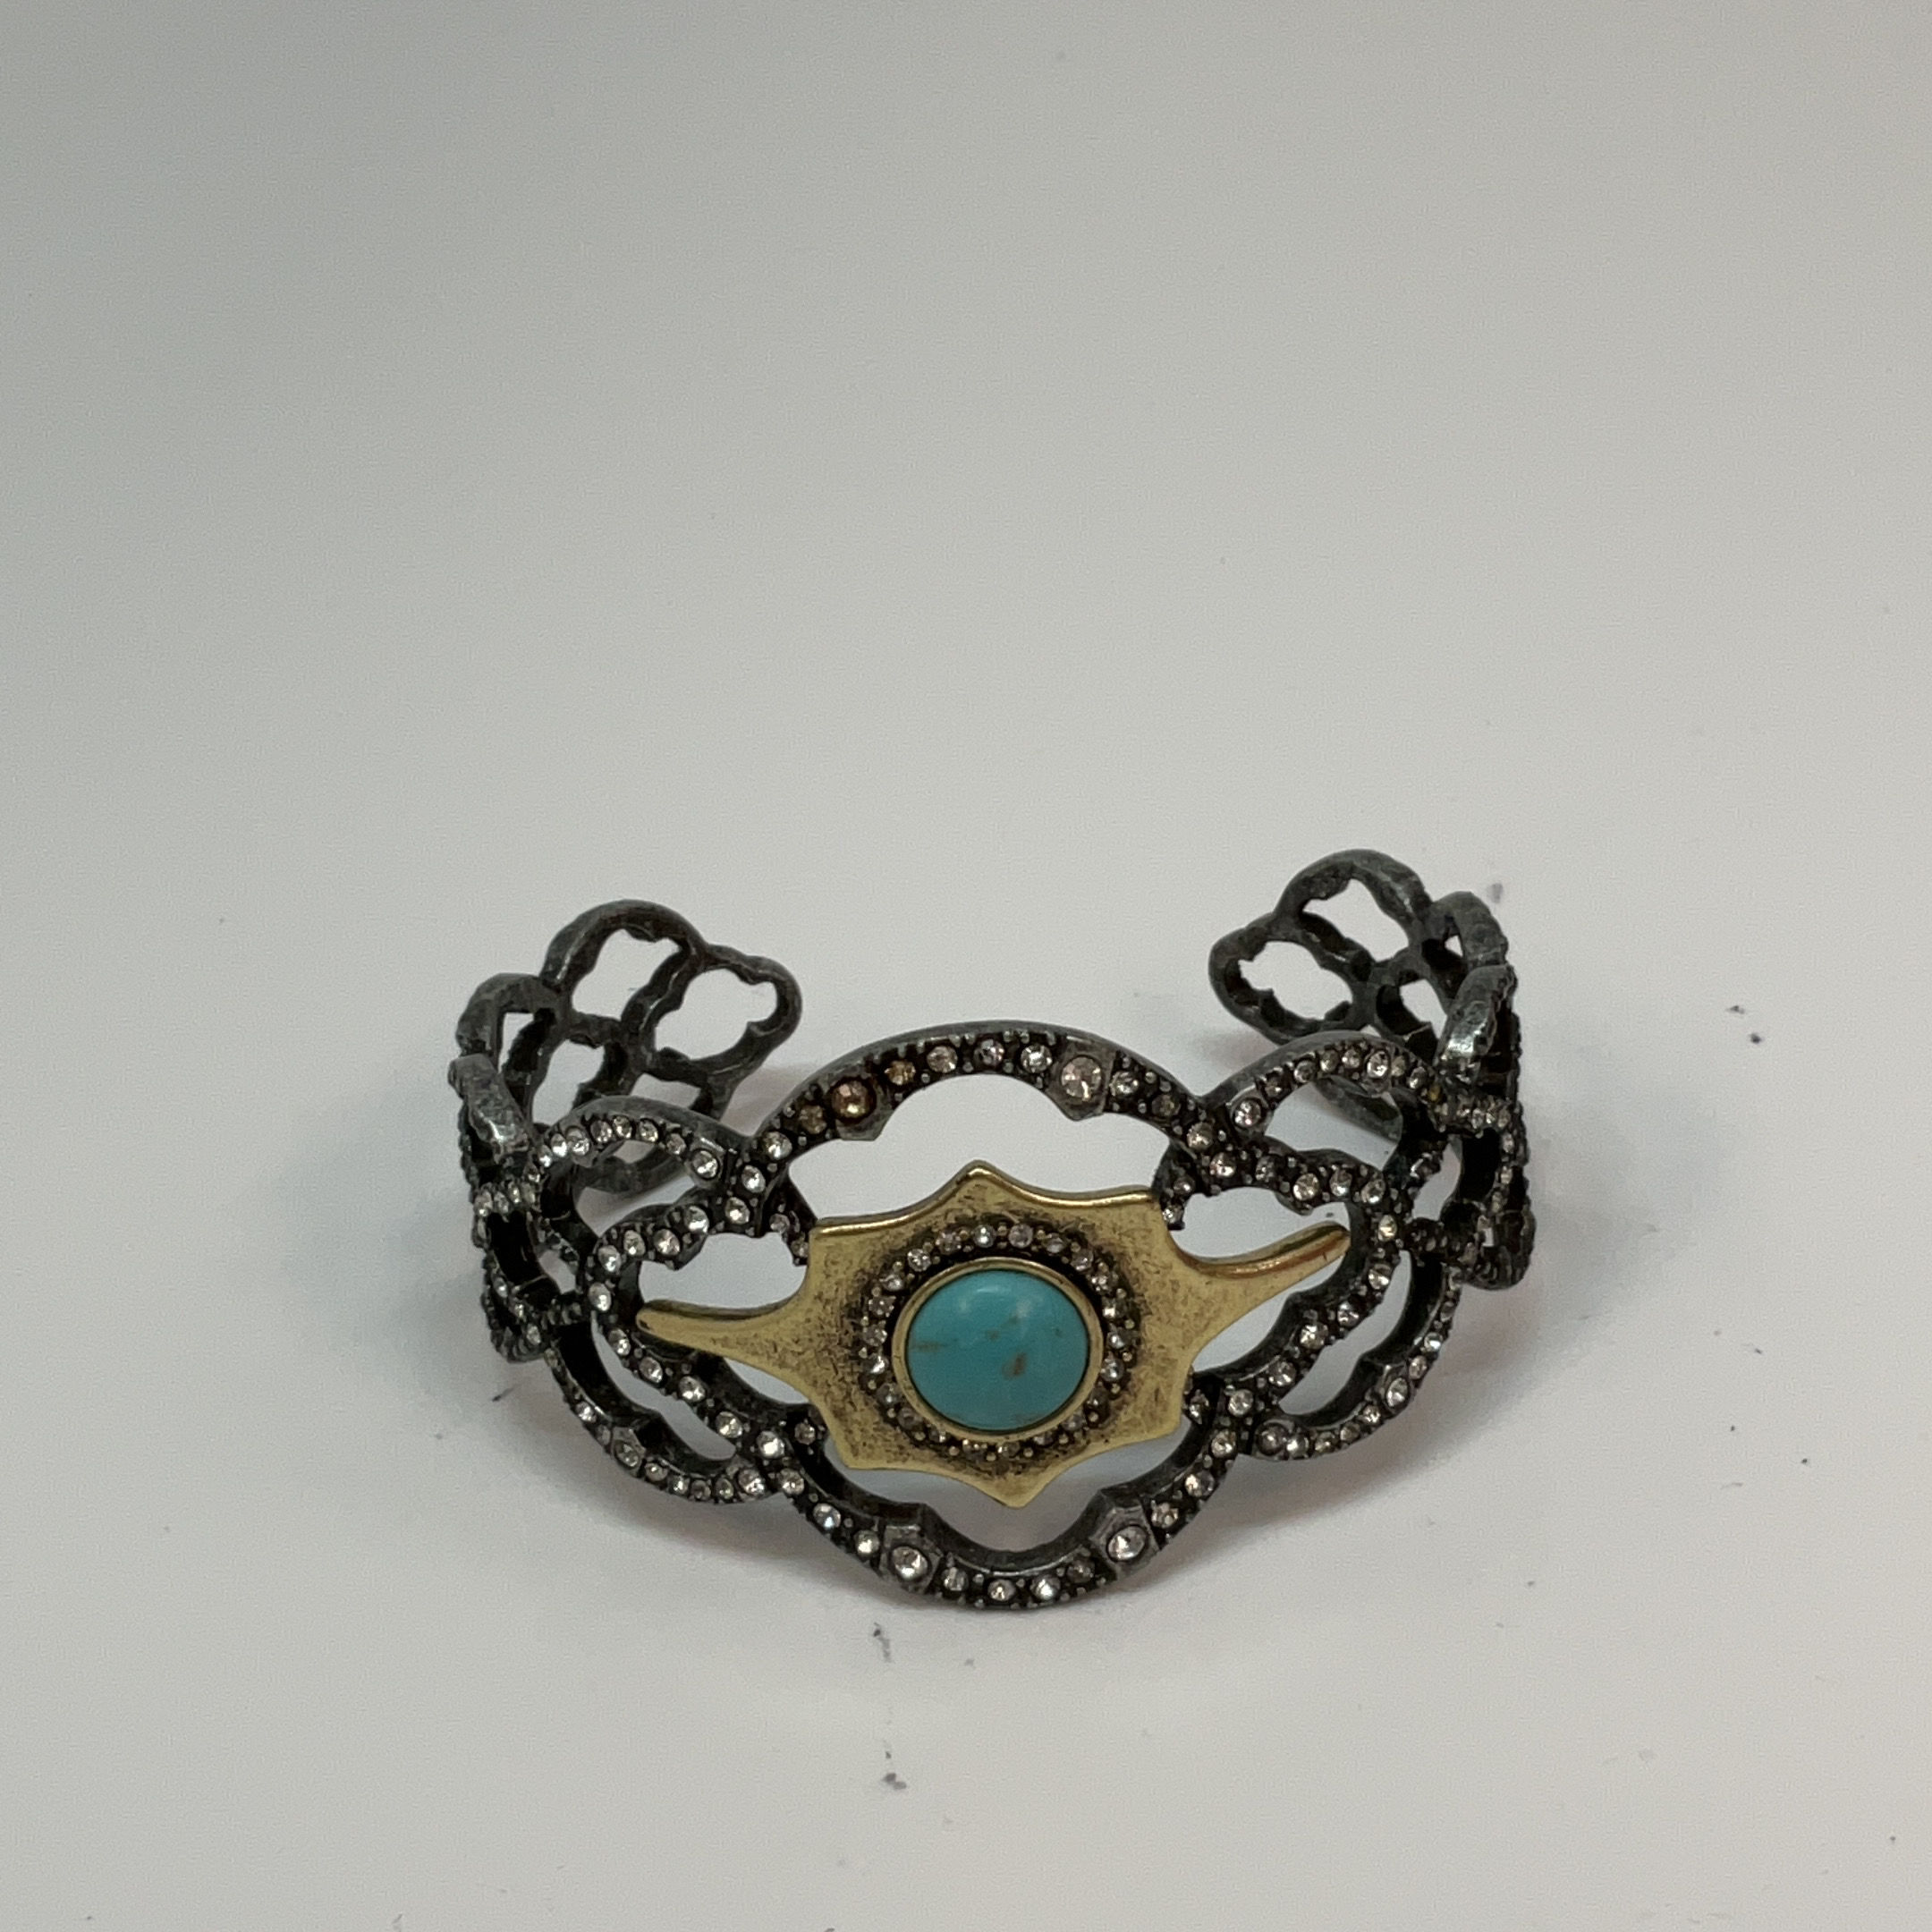 LUCKY BRAND Turquoise Colored Inlay Flower Design Silver Tone Cuff Bracelet  | eBay